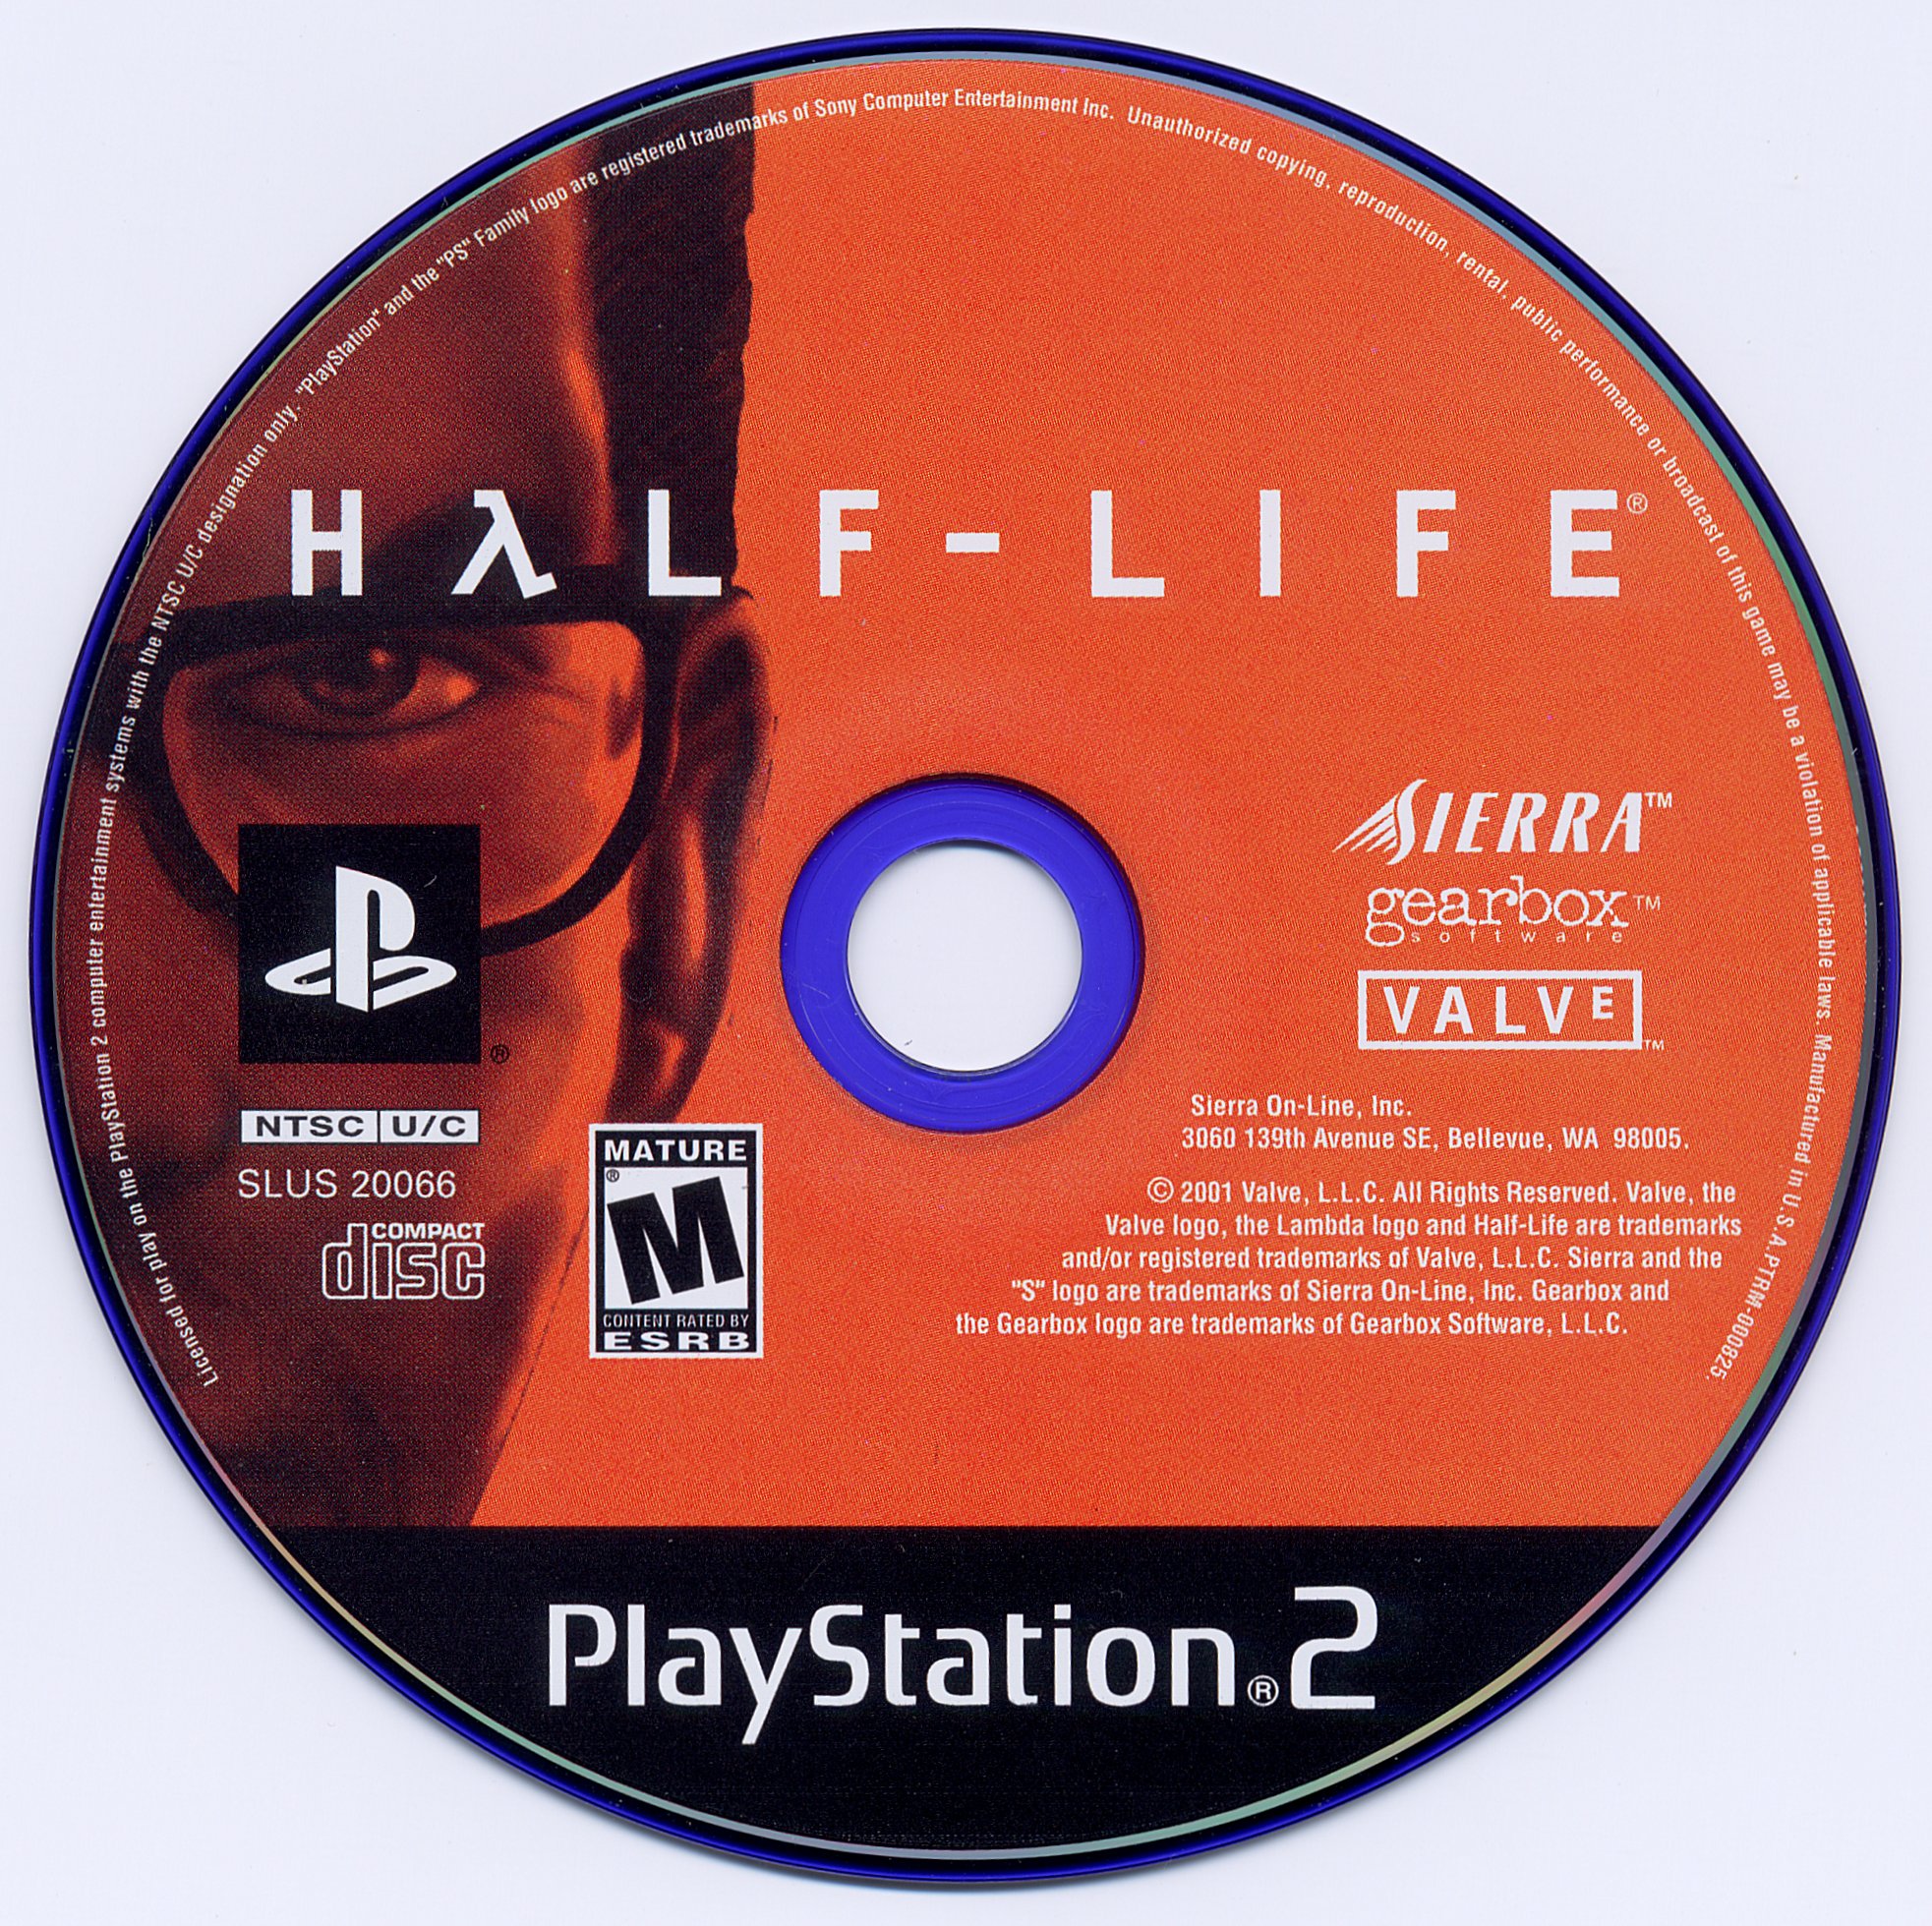 Please type in the cd key displayed on the half life cd case фото 71